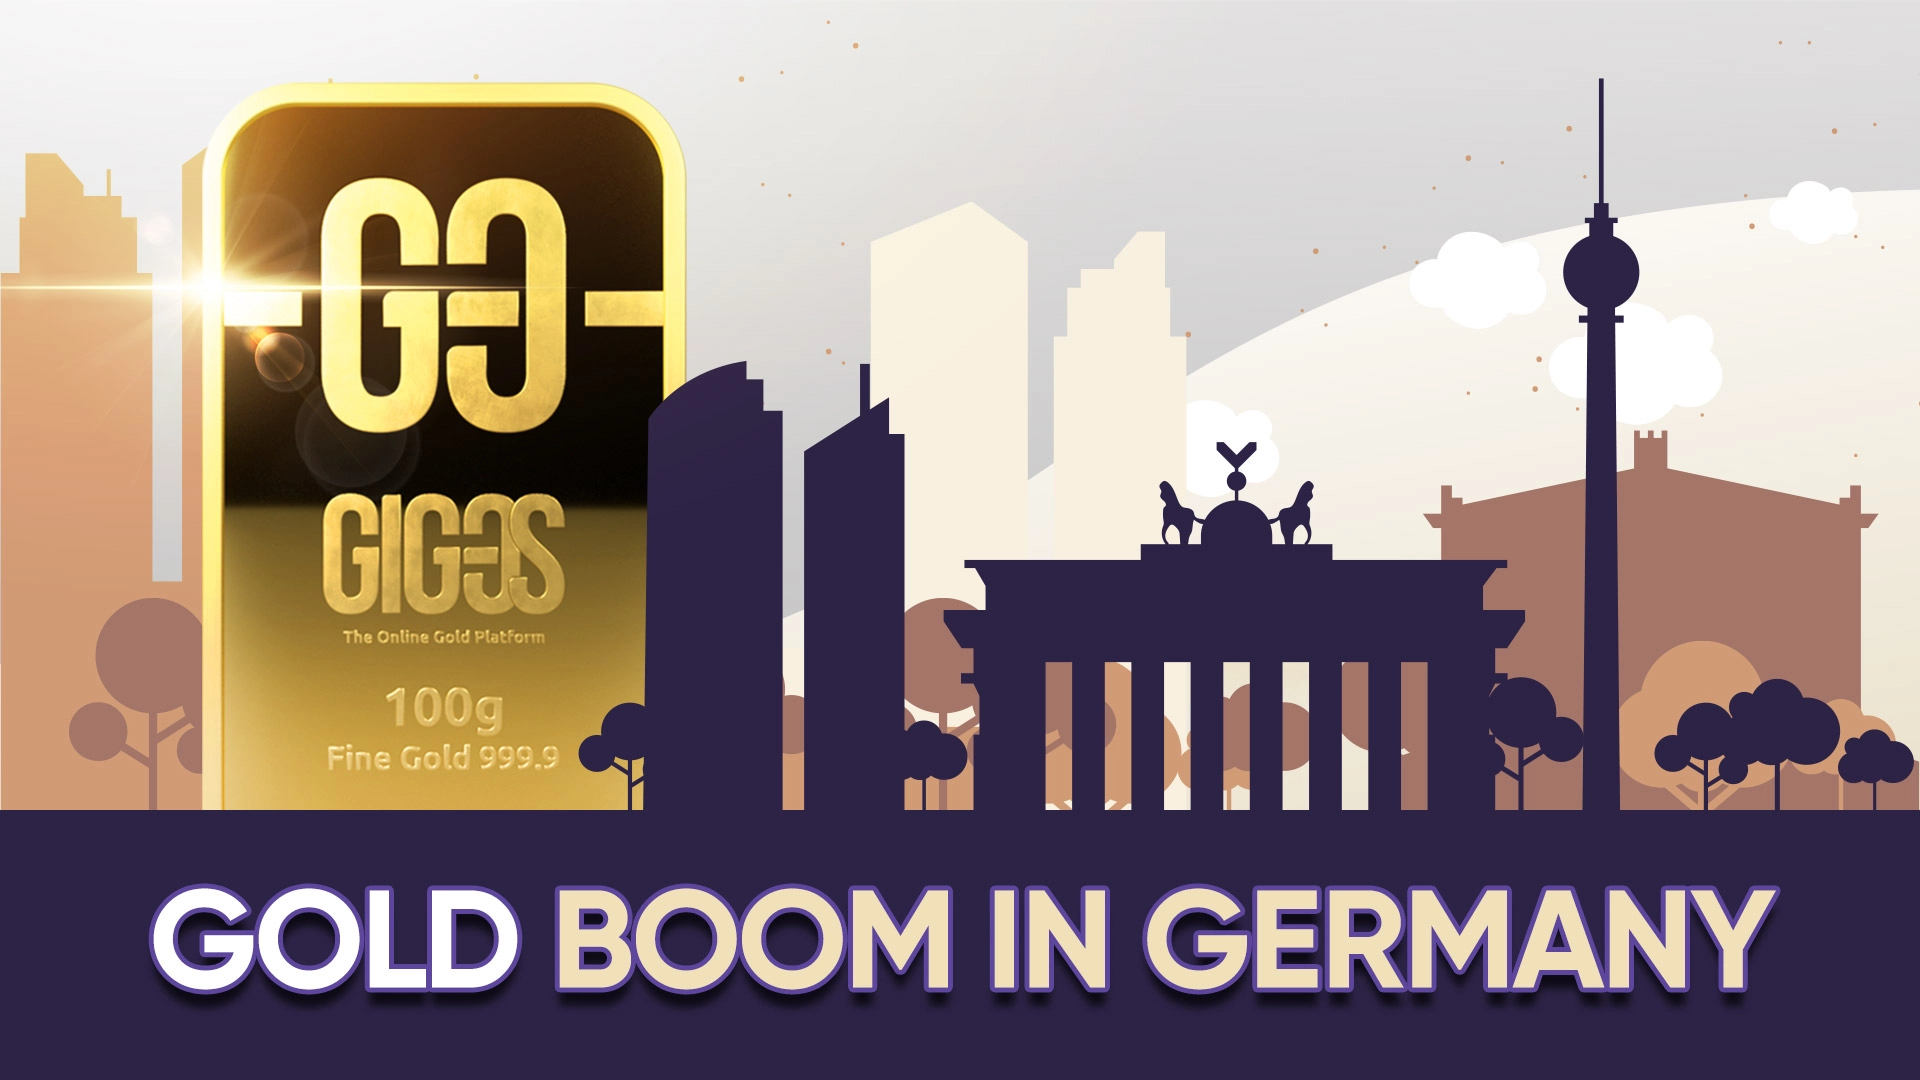 [VIDEO]: Gold boom in Germany